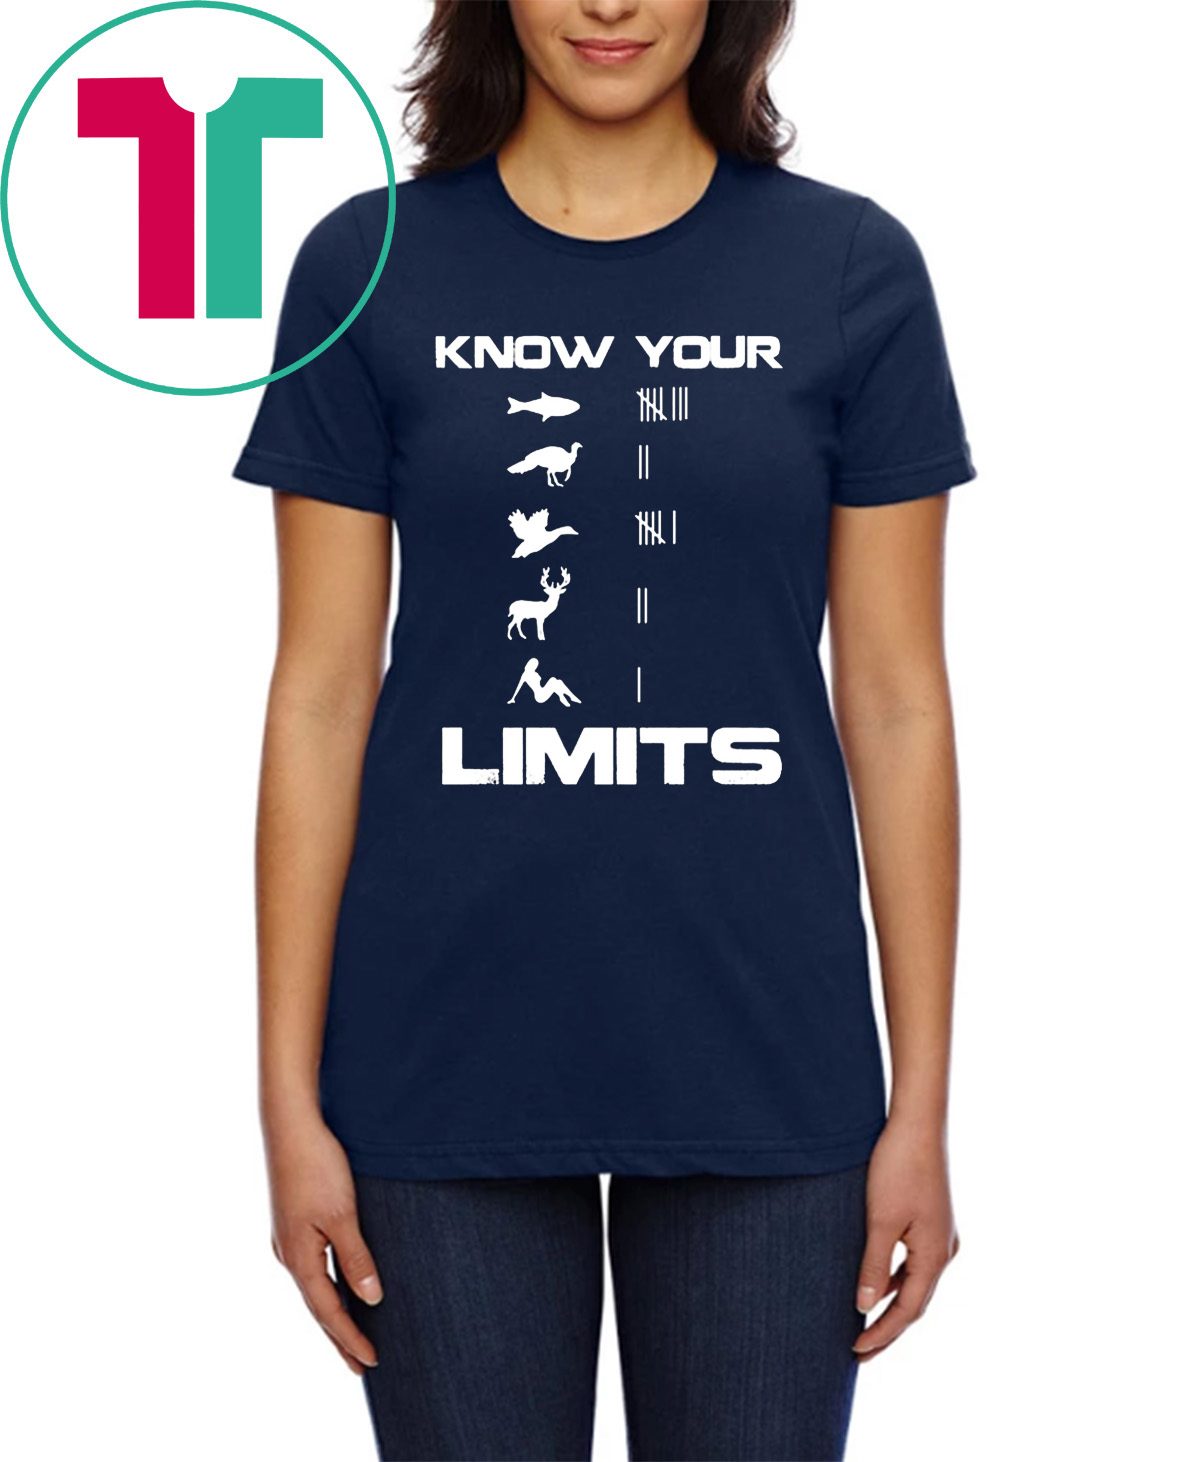 Know your limits funny tee shirt - OrderQuilt.com